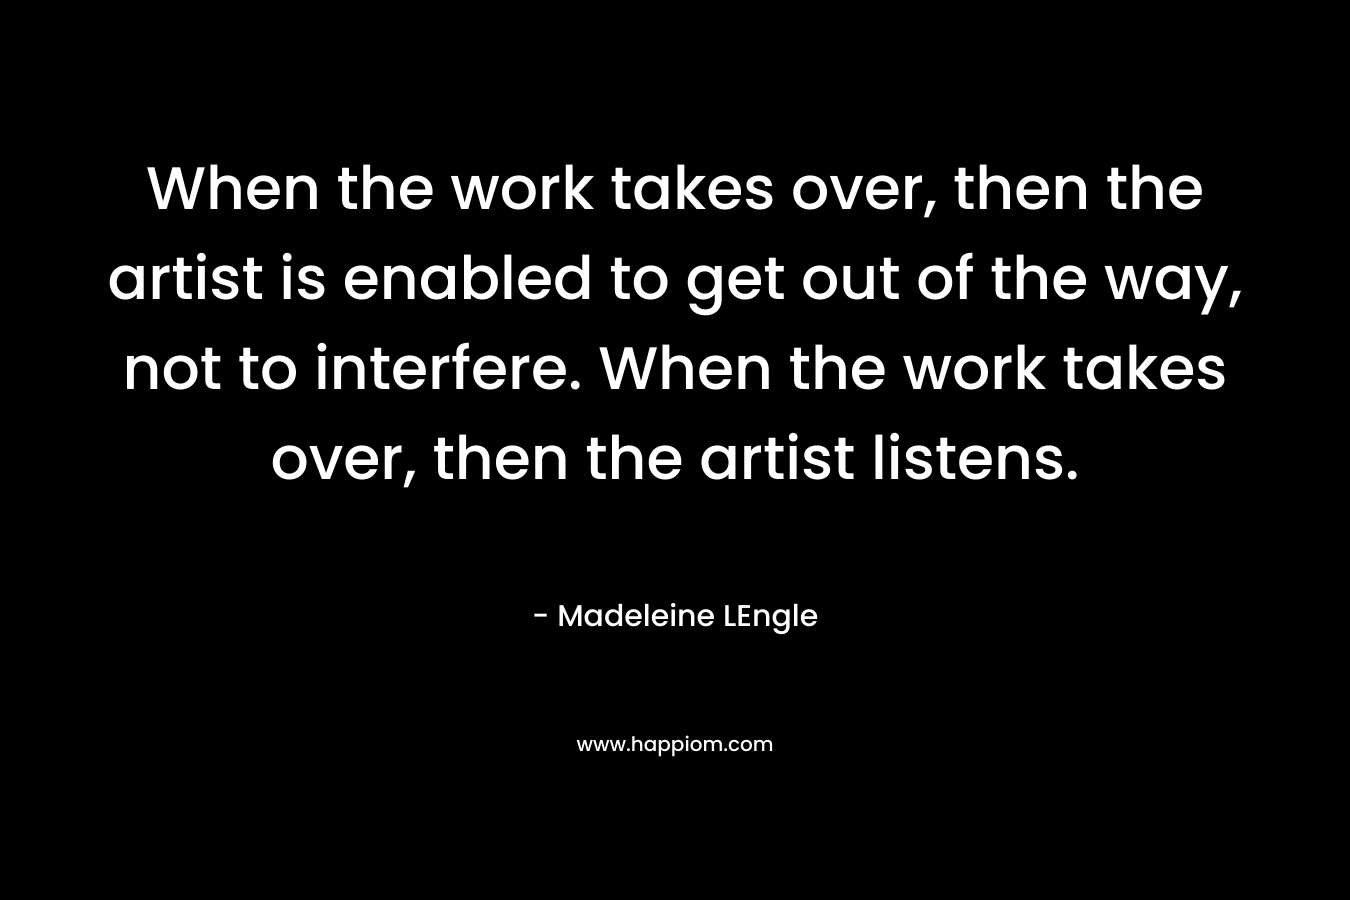 When the work takes over, then the artist is enabled to get out of the way, not to interfere. When the work takes over, then the artist listens.